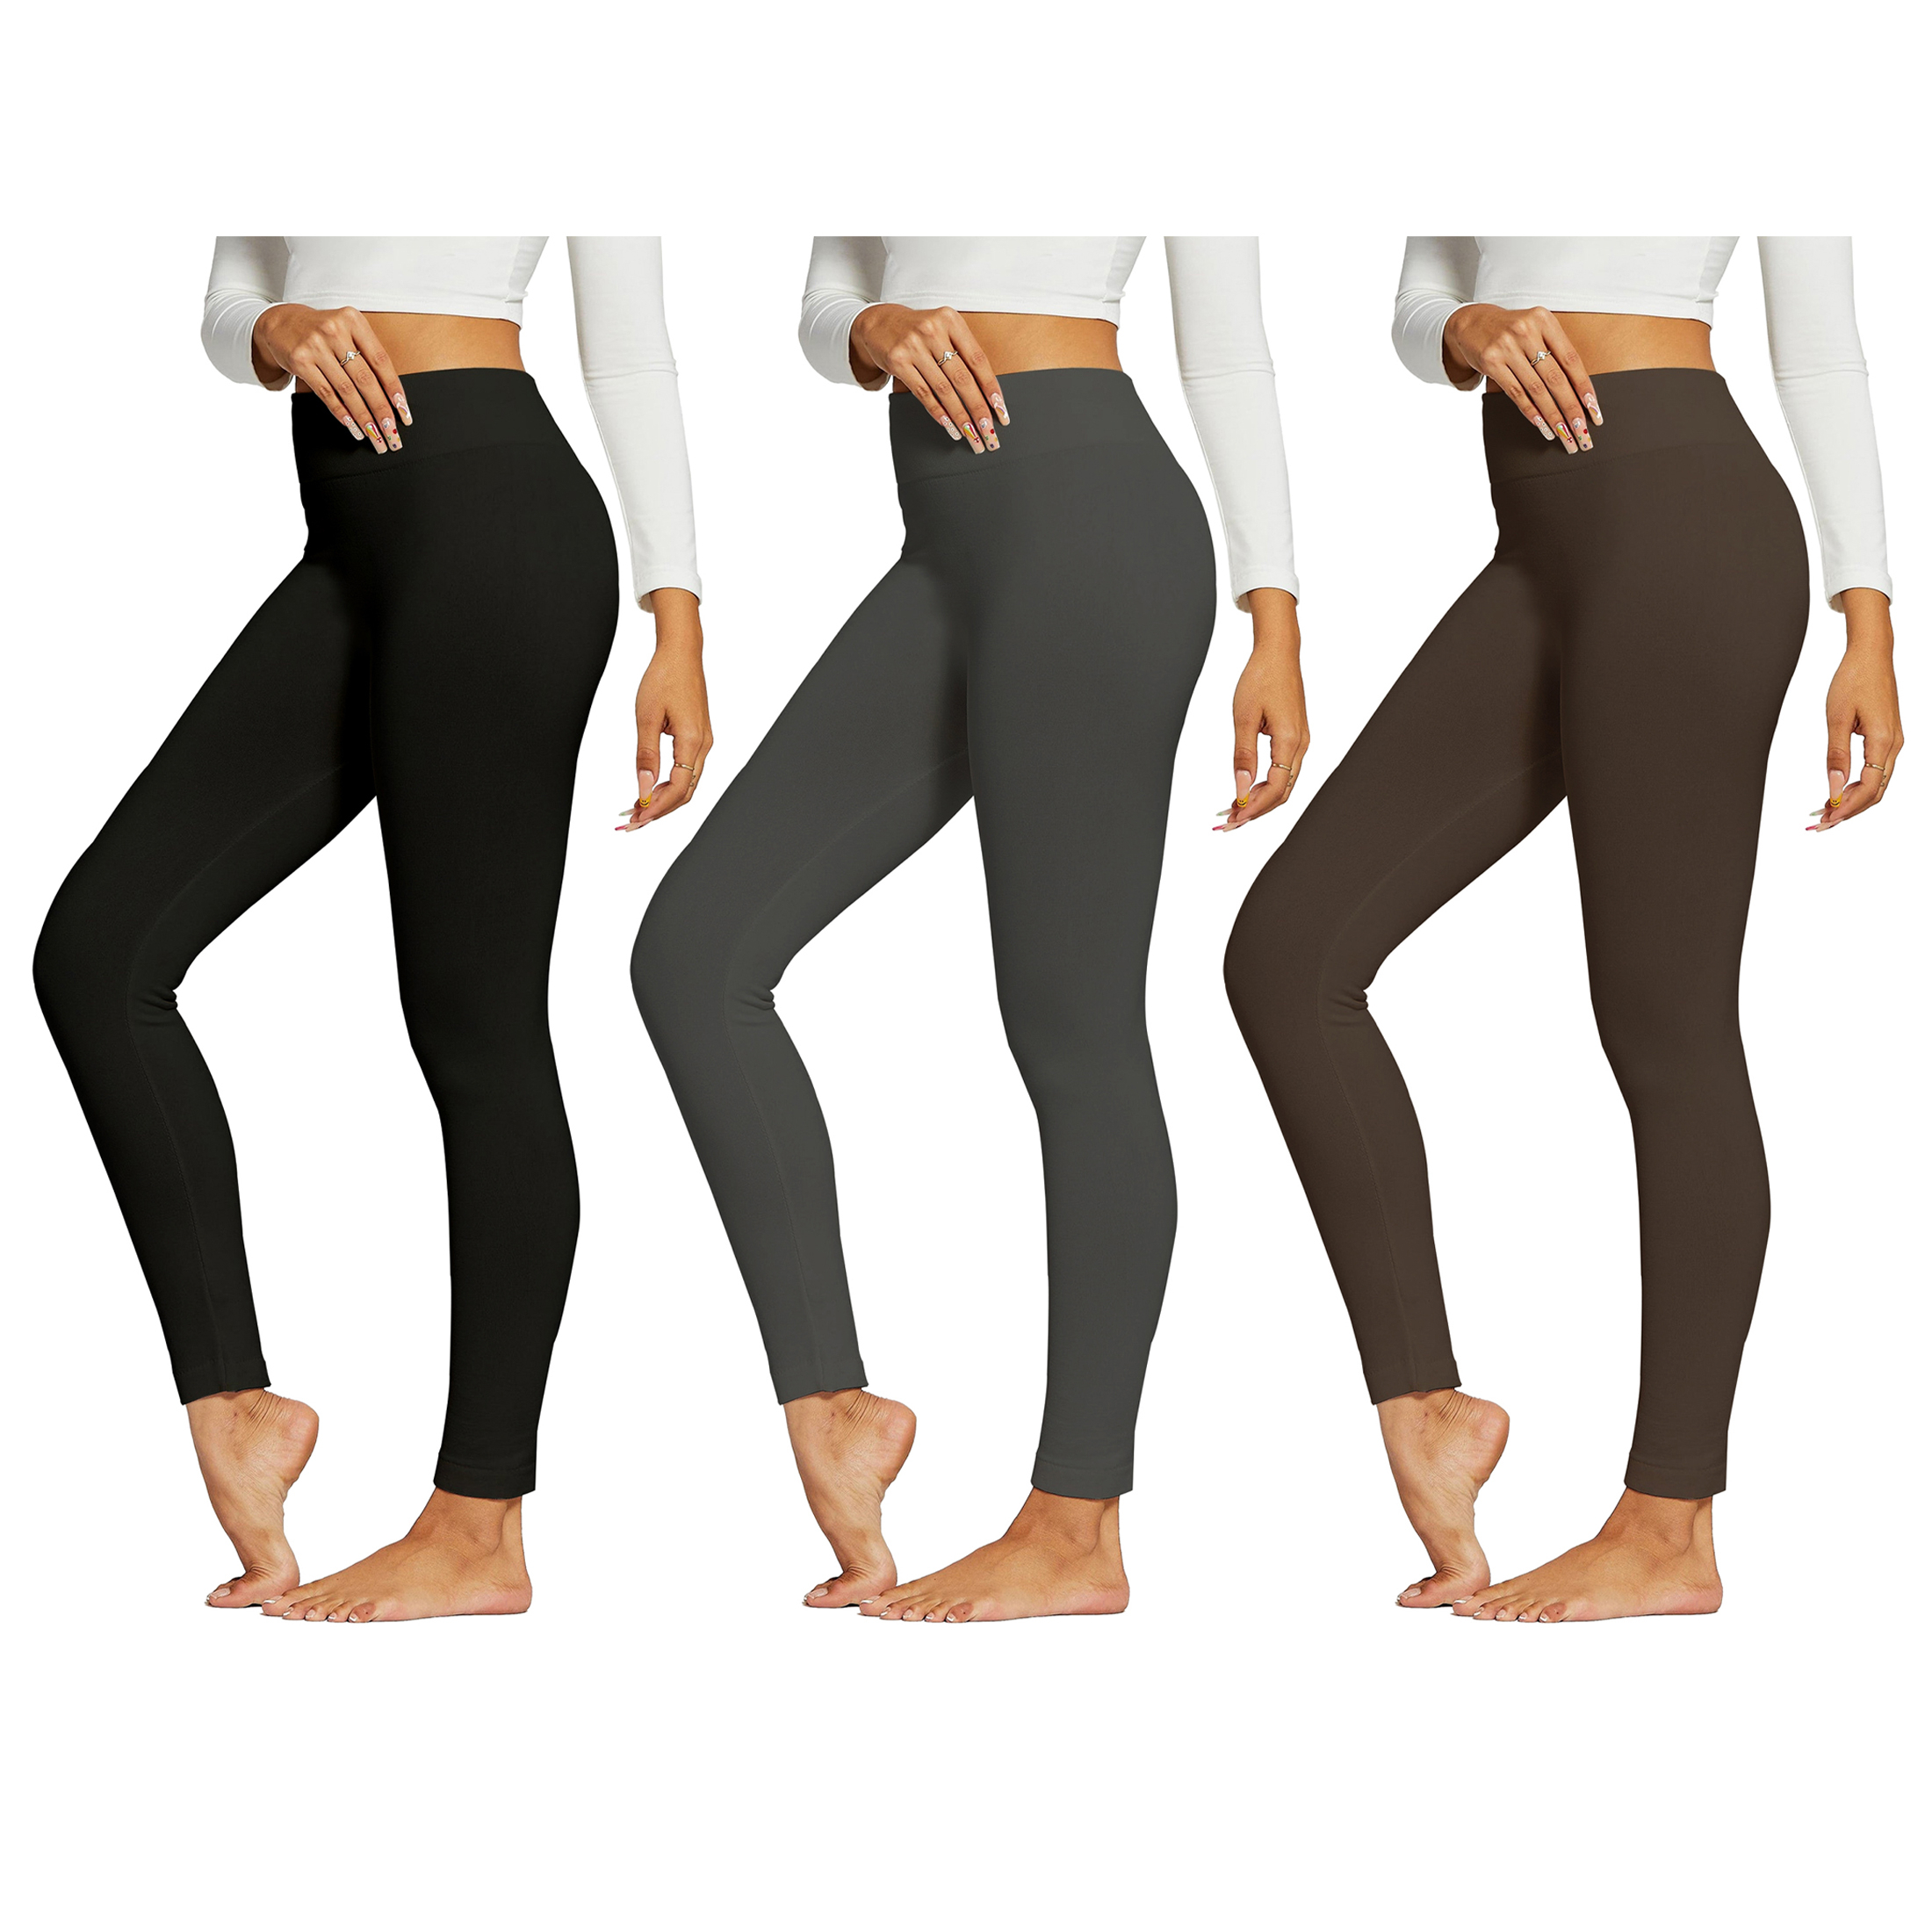 3-Pack:Women's Premium Quality High-Waist Fleece-Lined Leggings (Plus Size Available) - Black, Red & Brown, 3X/4X